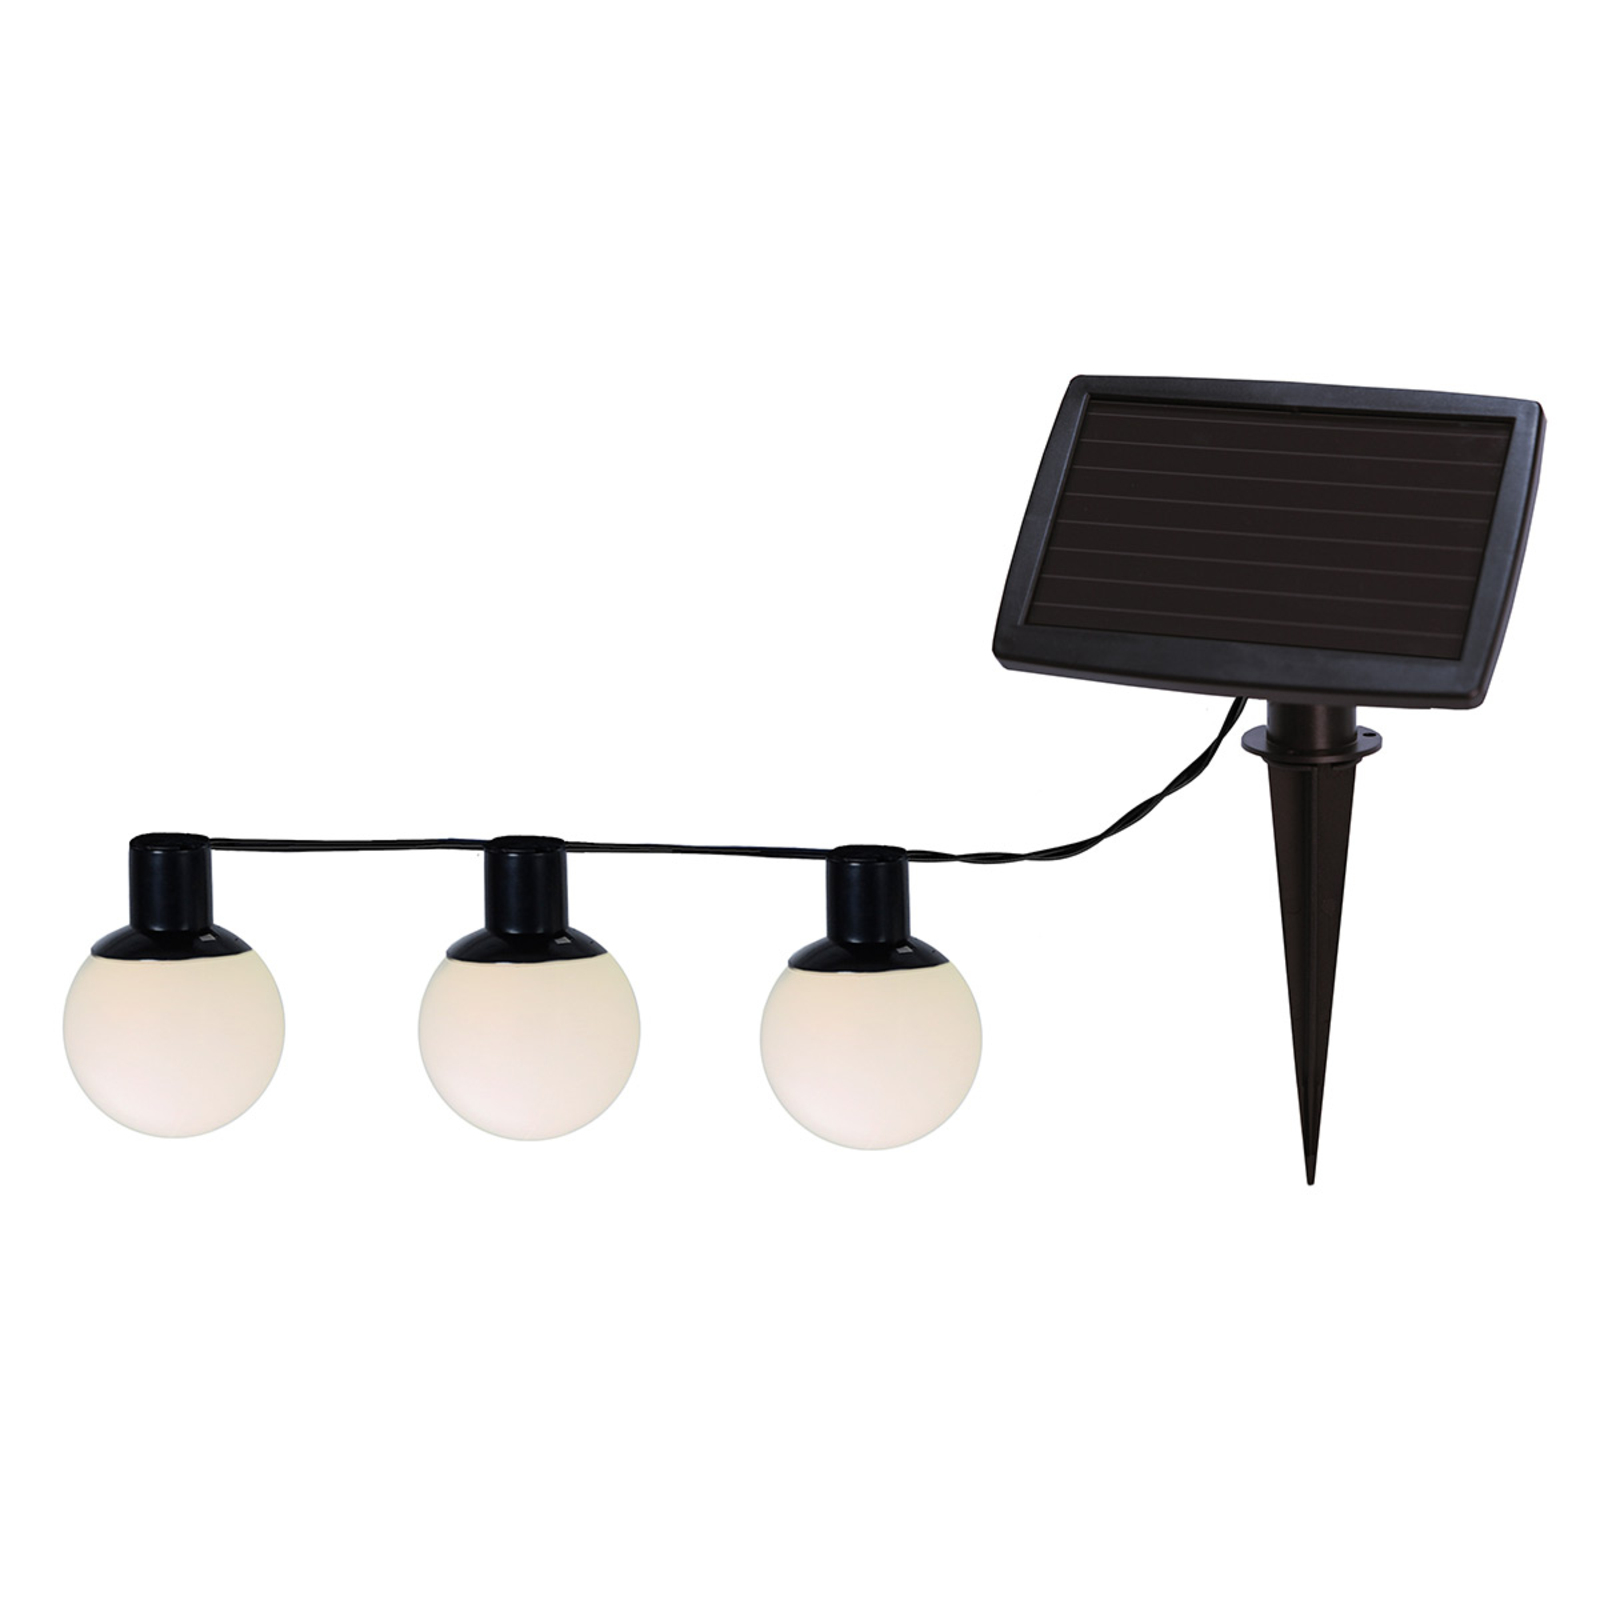 Guirlande lumineuse LED solaire Combo à 6 lampes